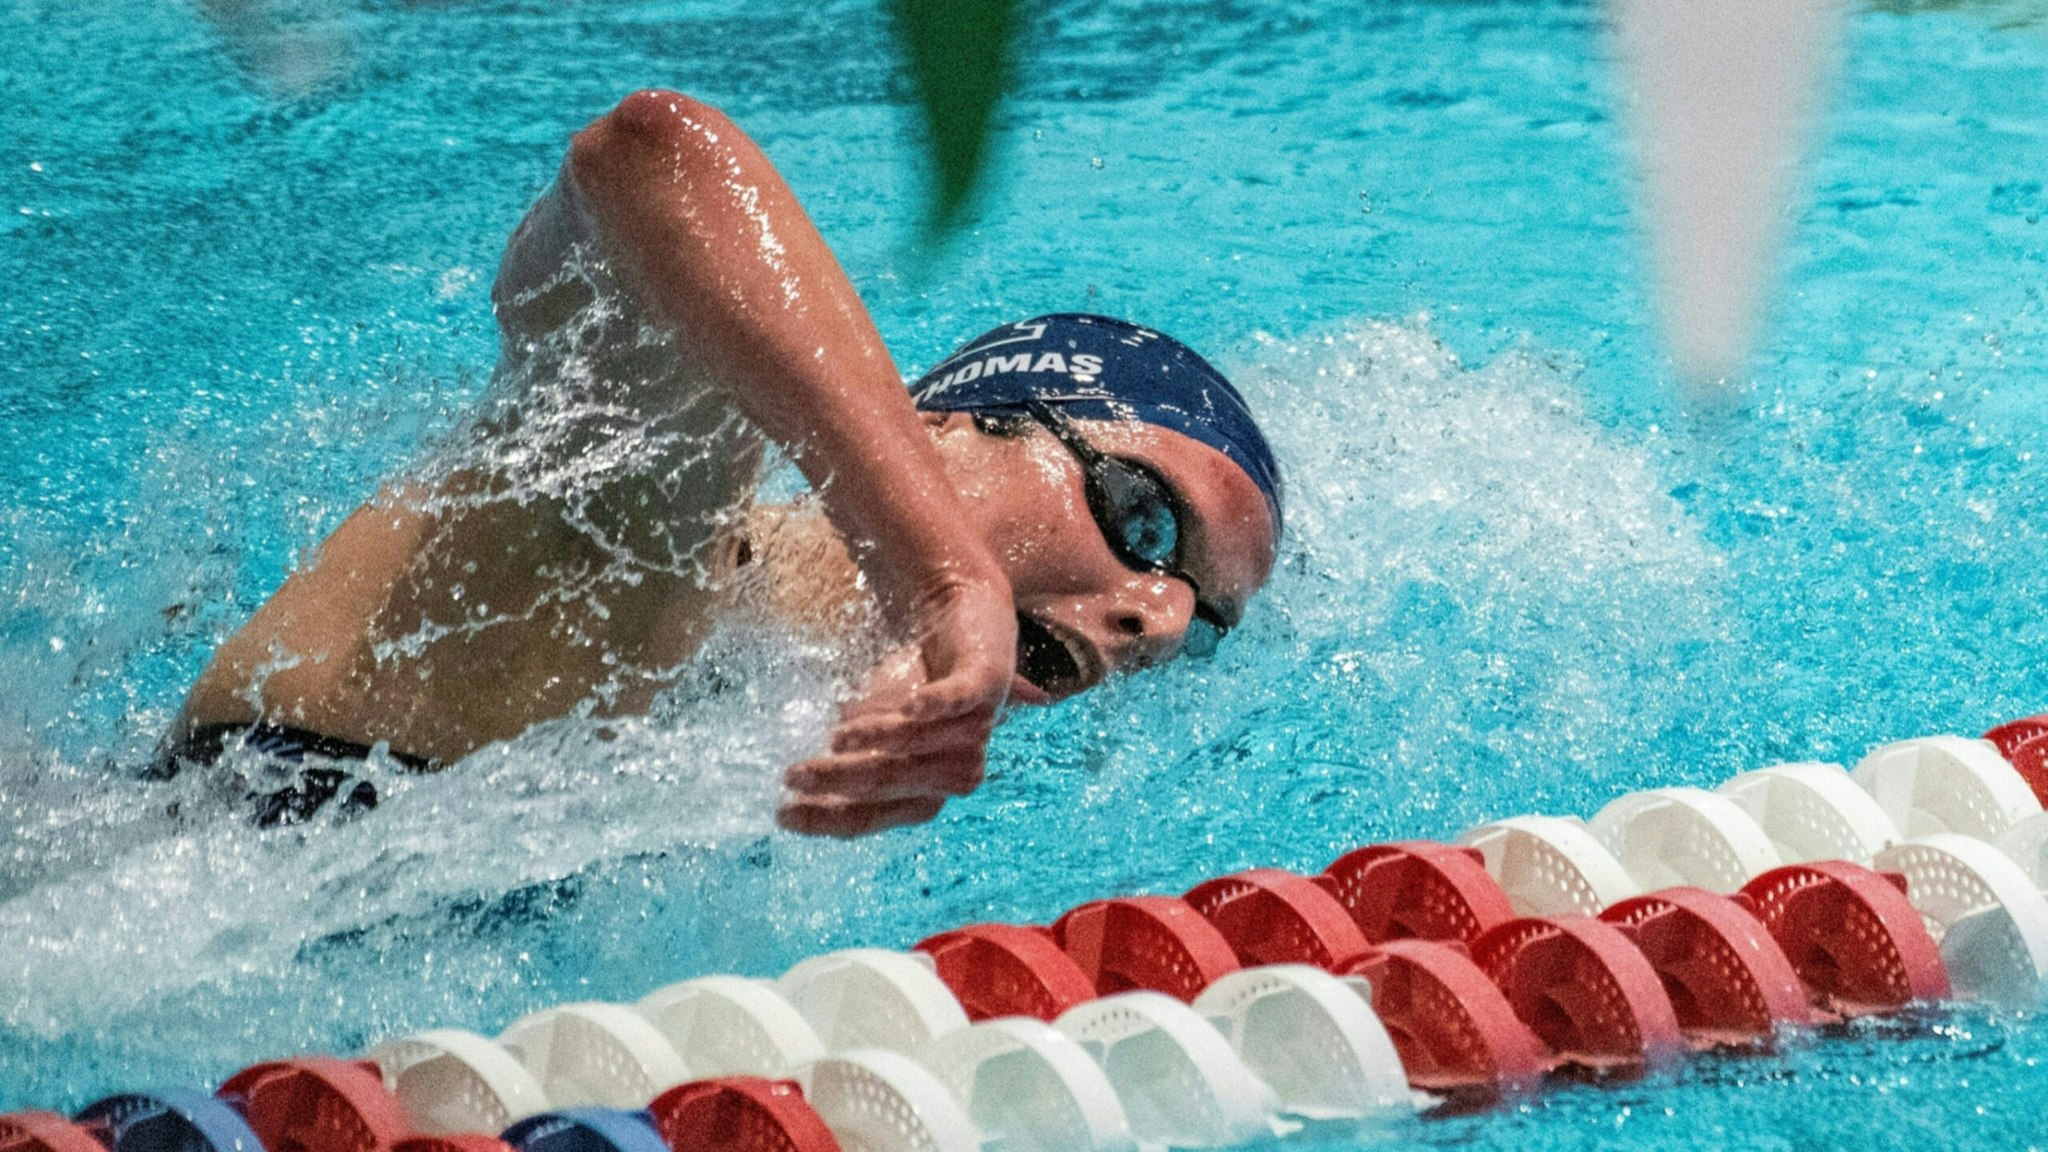 Penn Universitys transgender swimmer Lia Thomas swims in the 500 yard freestyle race, taking first place with 4.41.19, during the preliminary swim races in heat five during the Women's Ivy League Swimming & Diving Championships at Harvard University in Cambridge, Massachusetts on February 17, 2022.